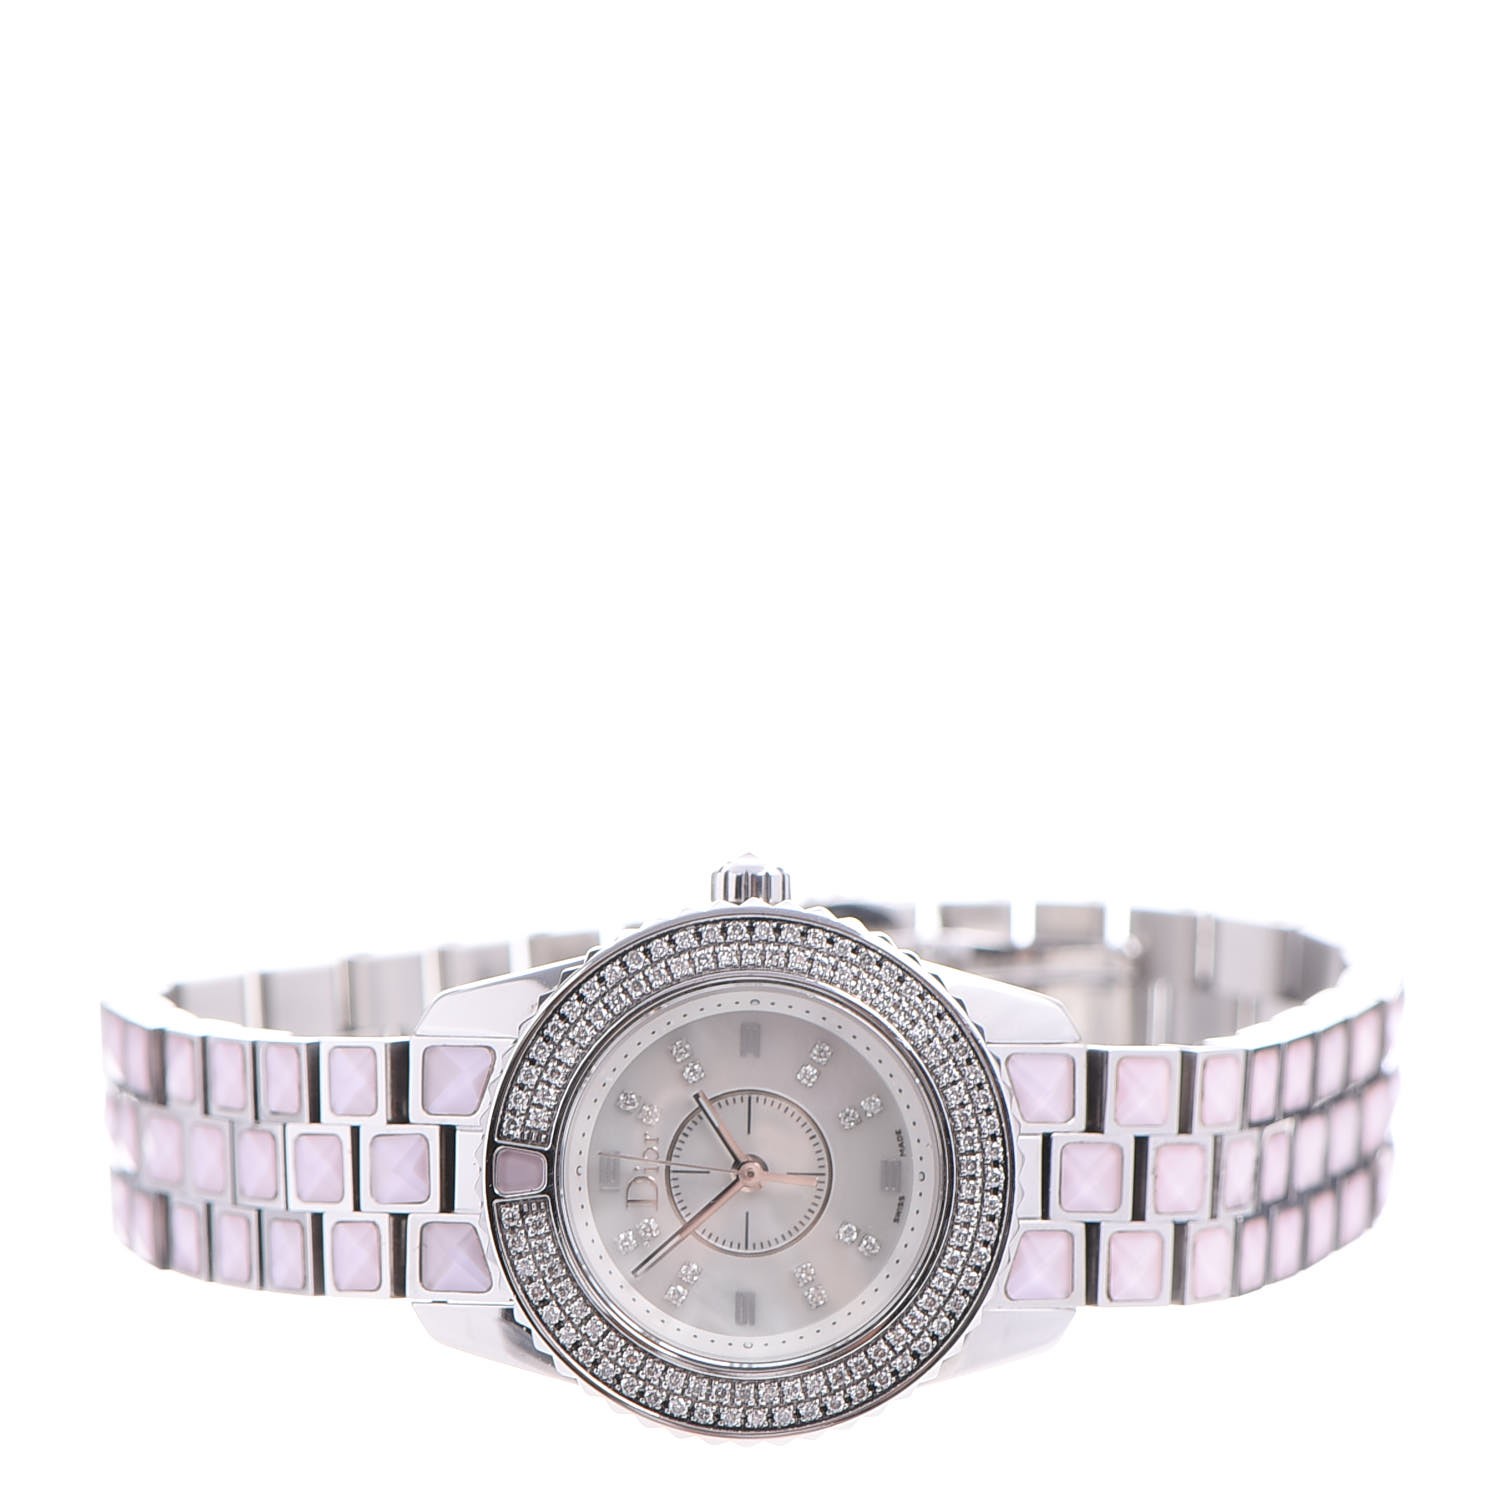 CHRISTIAN DIOR Stainless Steel Diamond 29mm Les Montres Watch Light